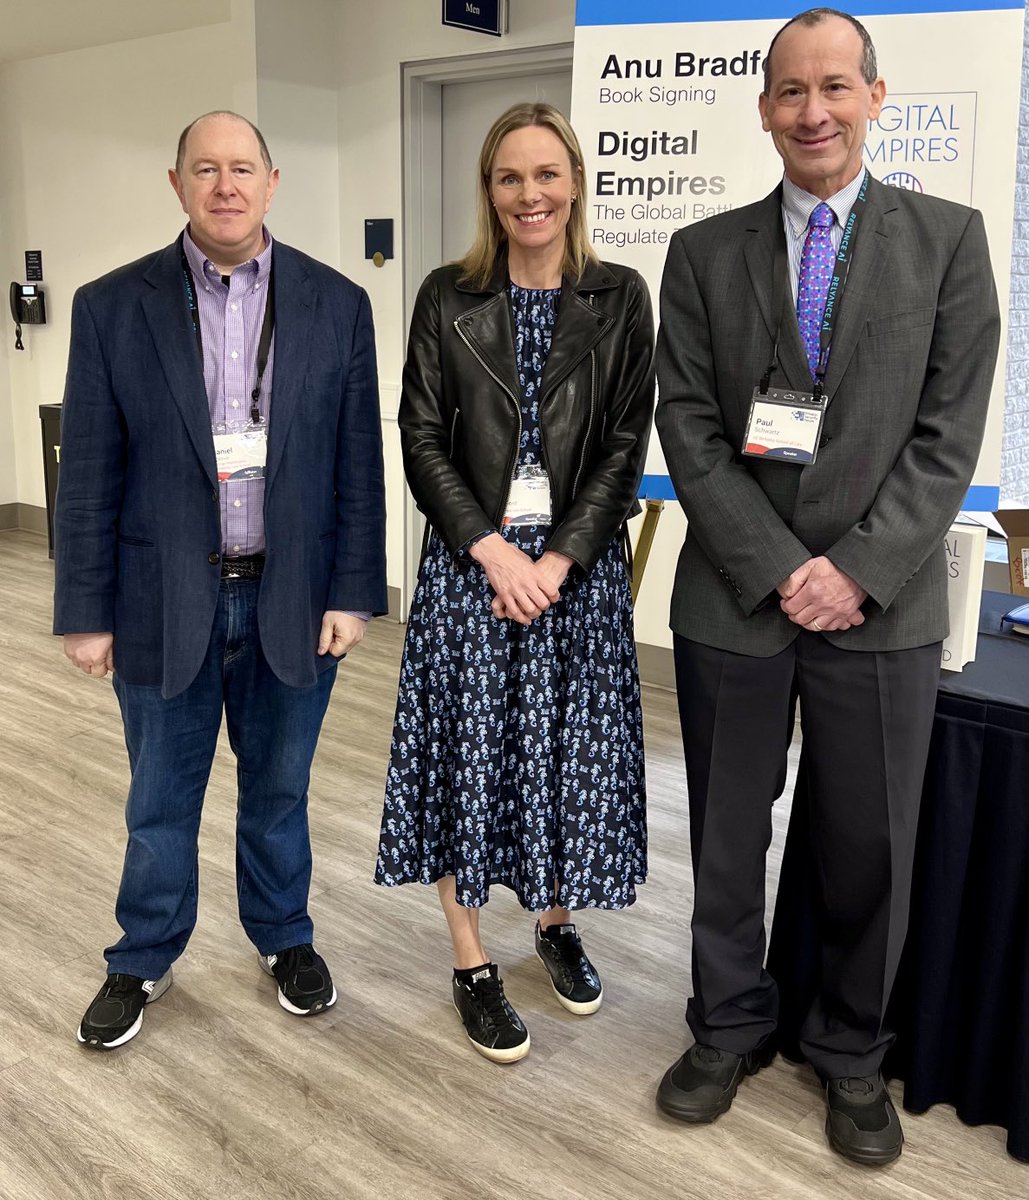 Great keynote by ⁦@anubradford⁩ yesterday at the Privacy + Security Forum in DC. We discussed her pathbreaking book, Digital Empires. ⁦@DanielSolove⁩ ⁦@privsecacademy⁩